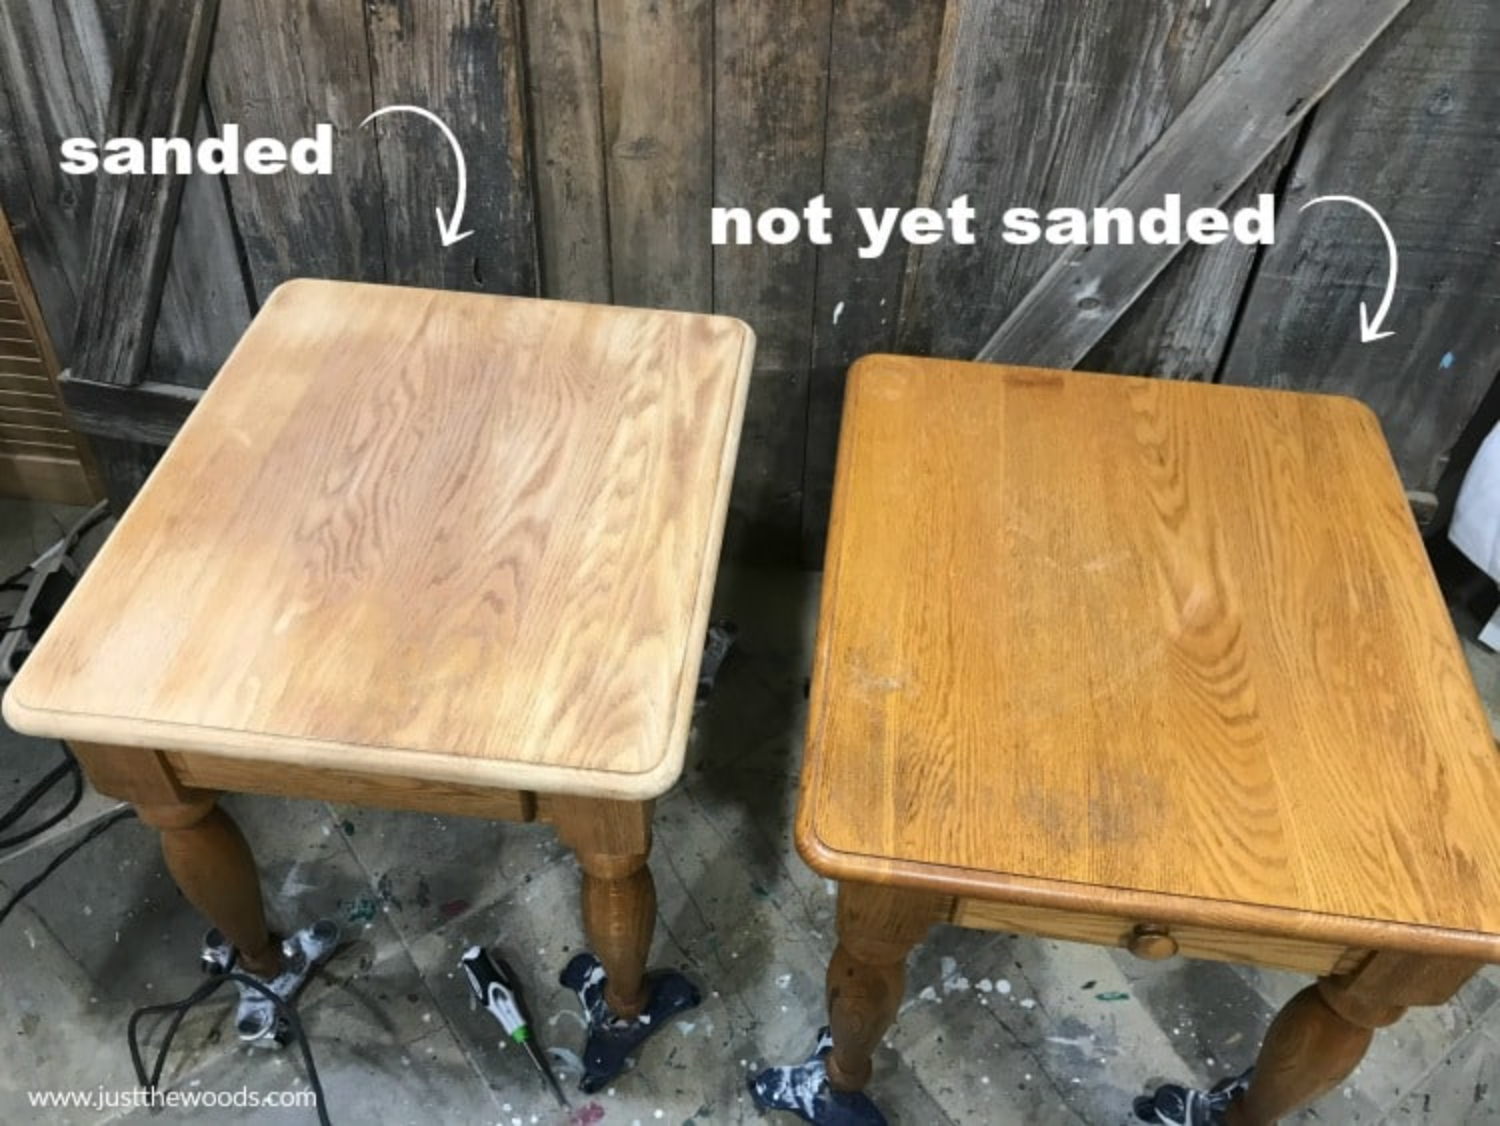 sanding makes a difference